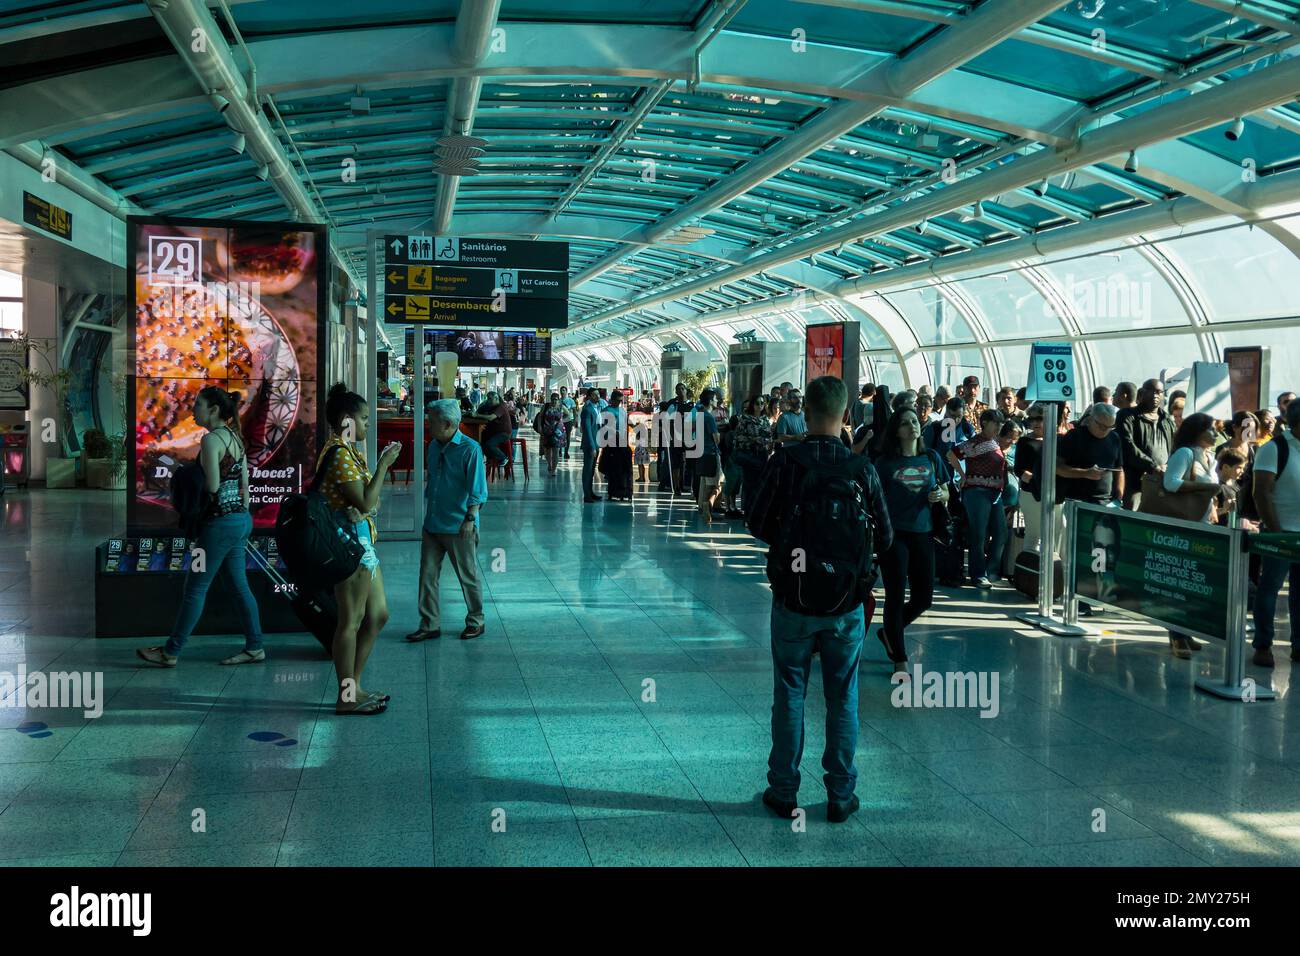 The Santos Dumont airport departure room passenger terminal crowded with passengers waiting for boarding his flights in an early summer morning. Stock Photo